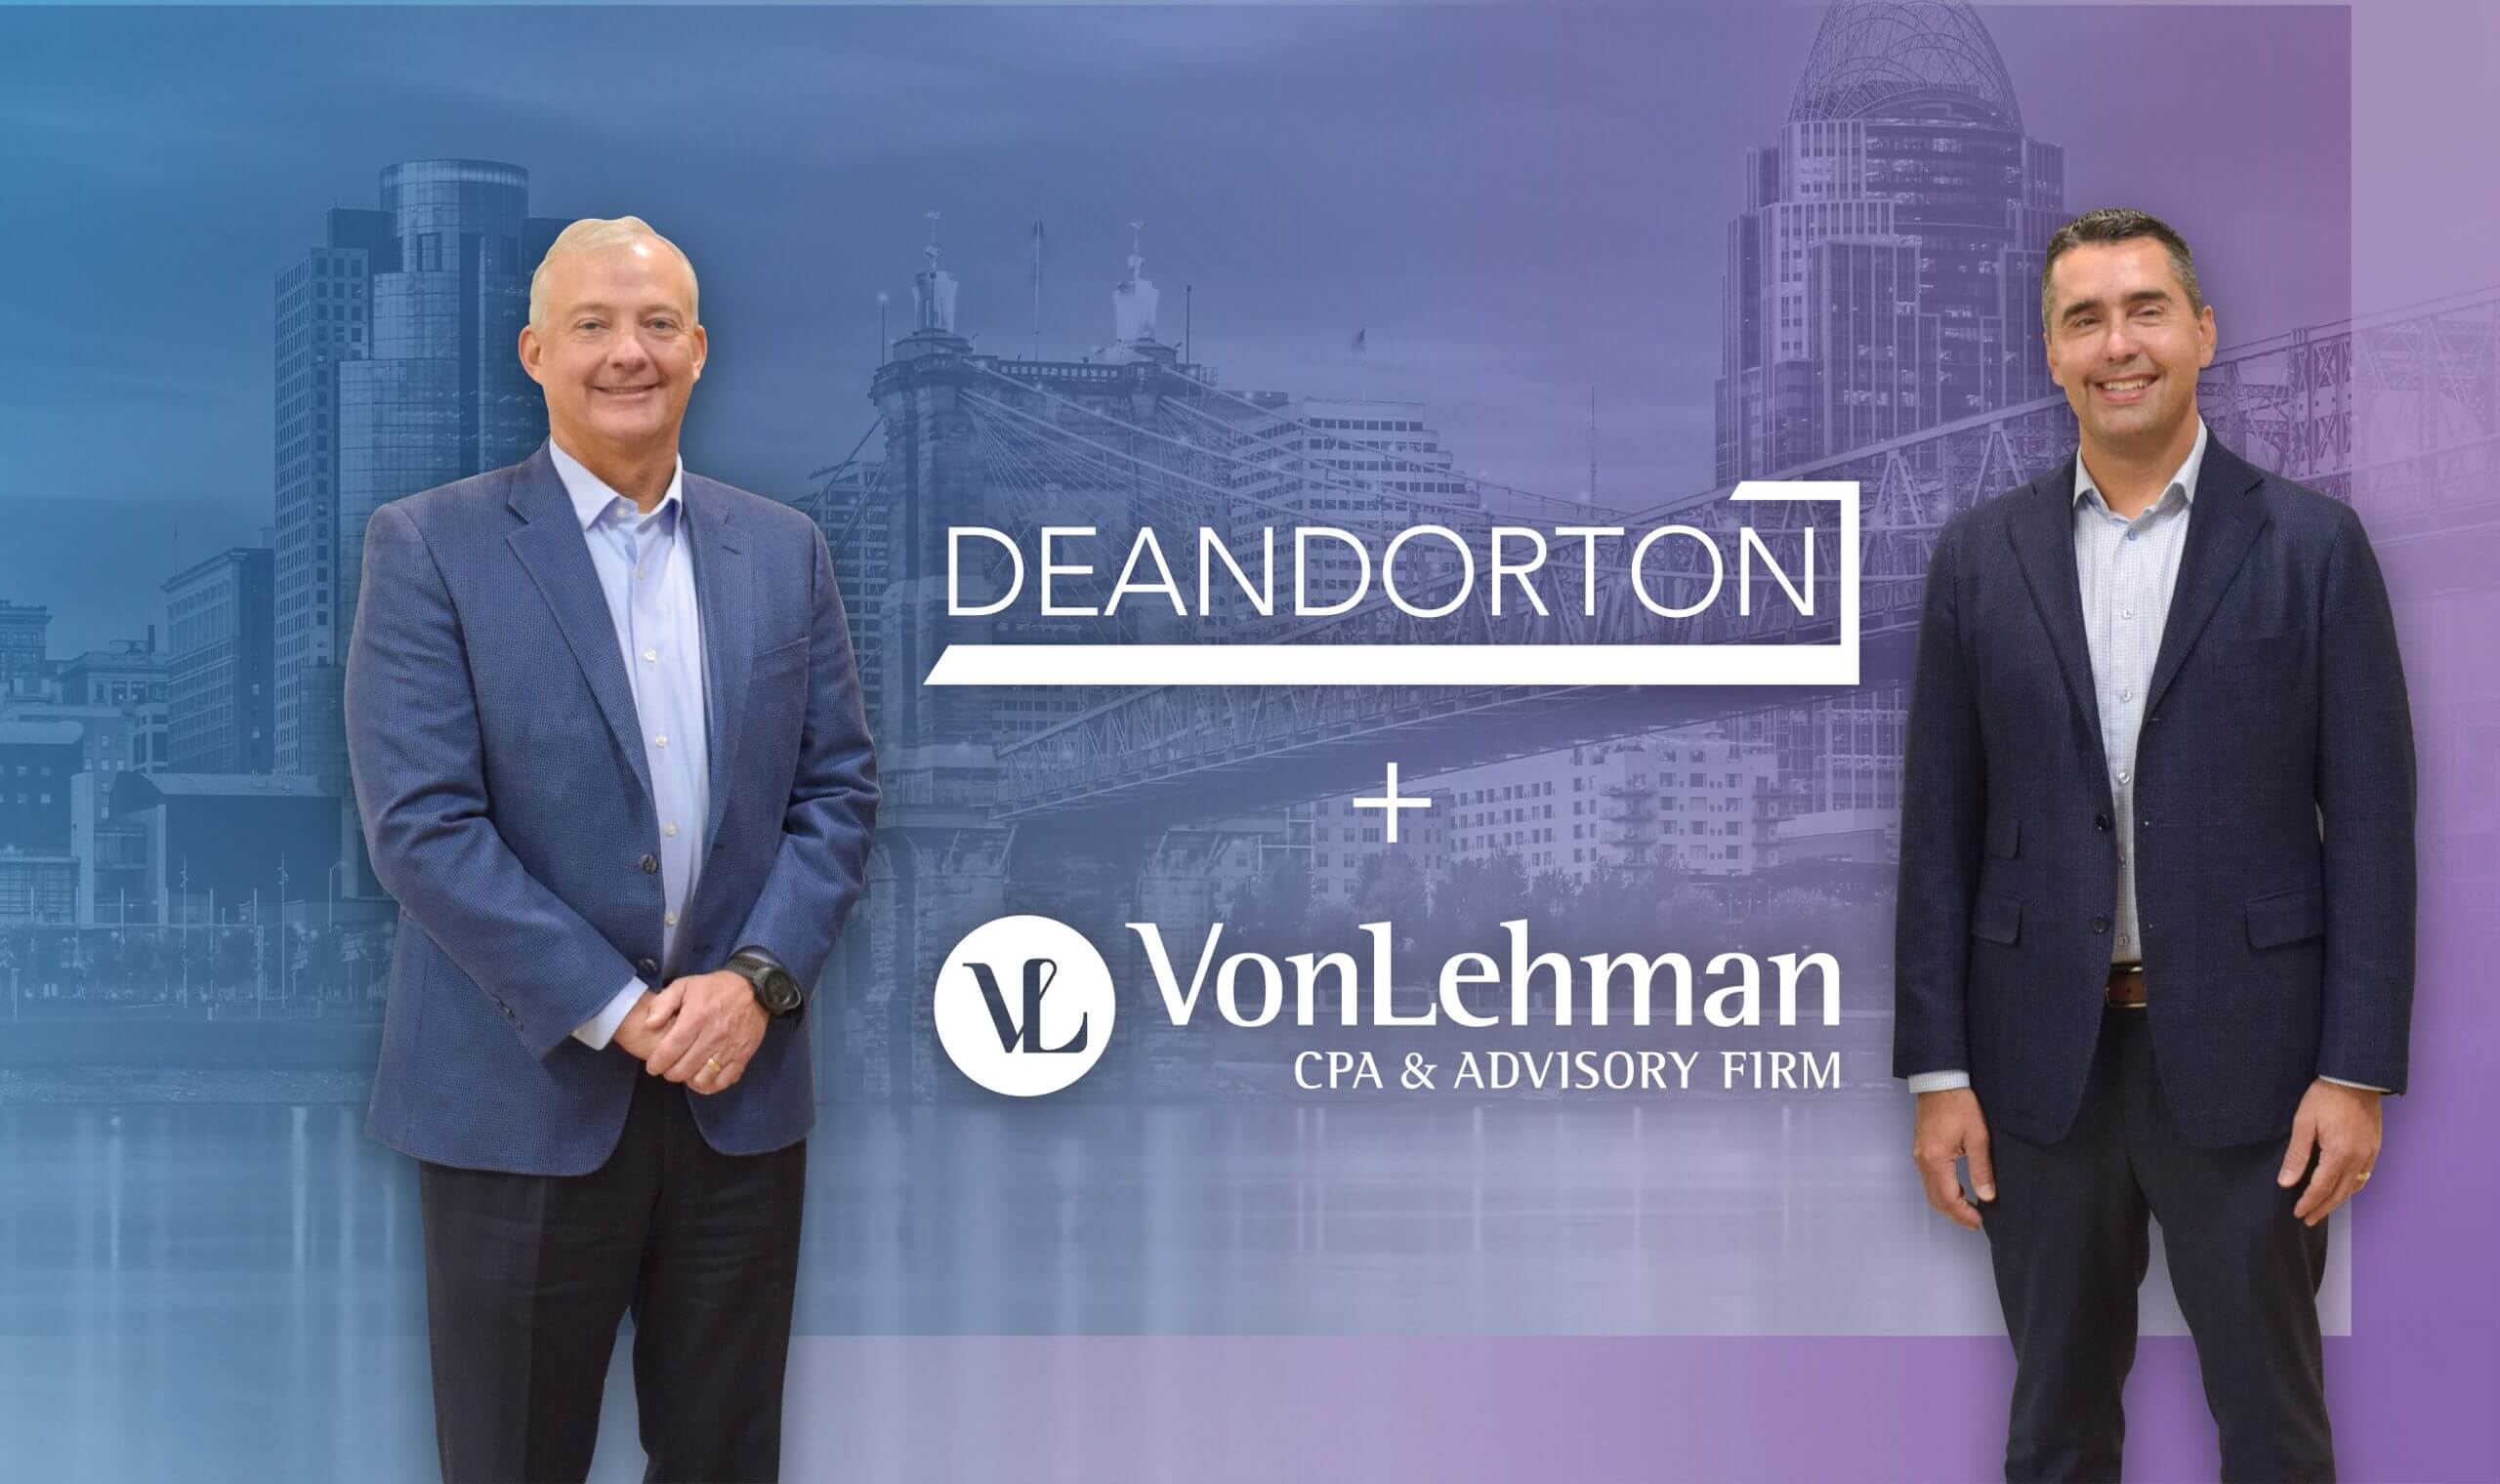 dorton Top Firms Continue Growth Trajectory through Strategic Merger Redefining Advisory Services